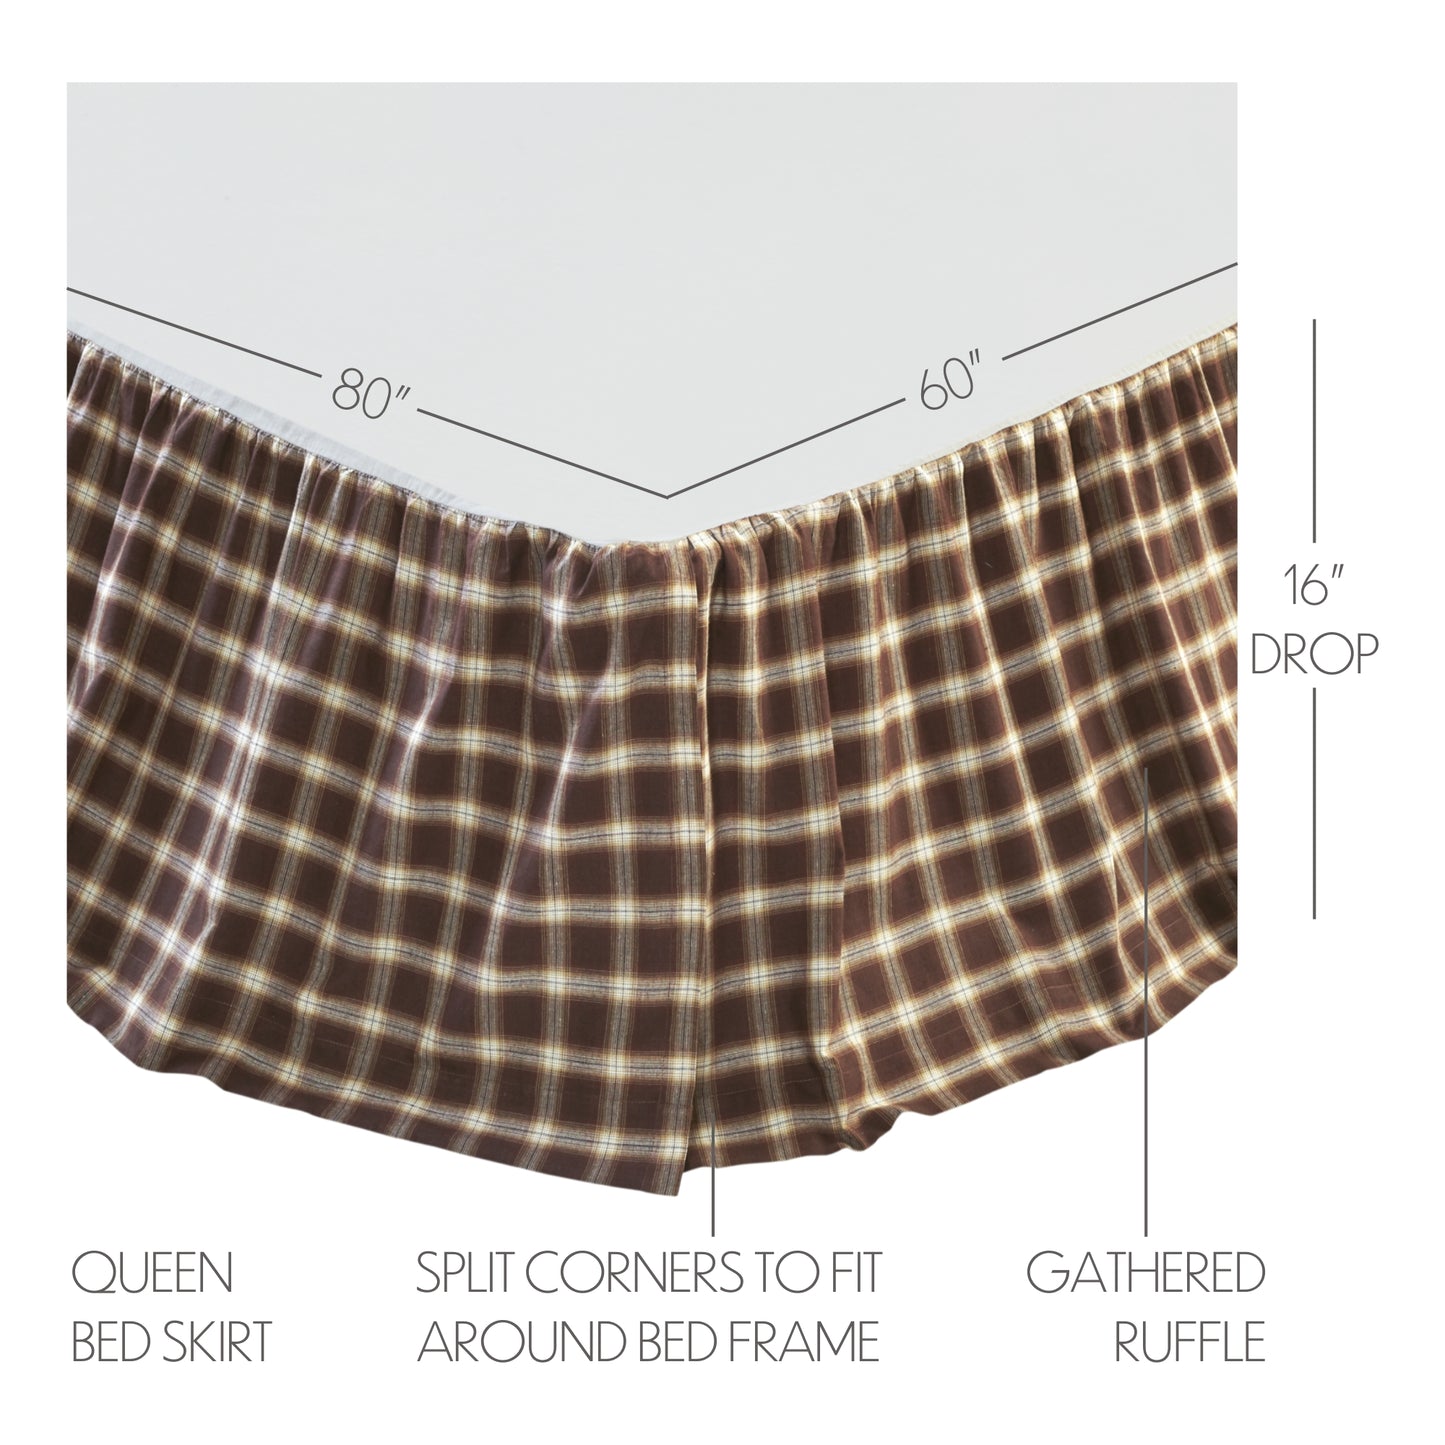 38013-Rory-Queen-Bed-Skirt-60x80x16-image-1